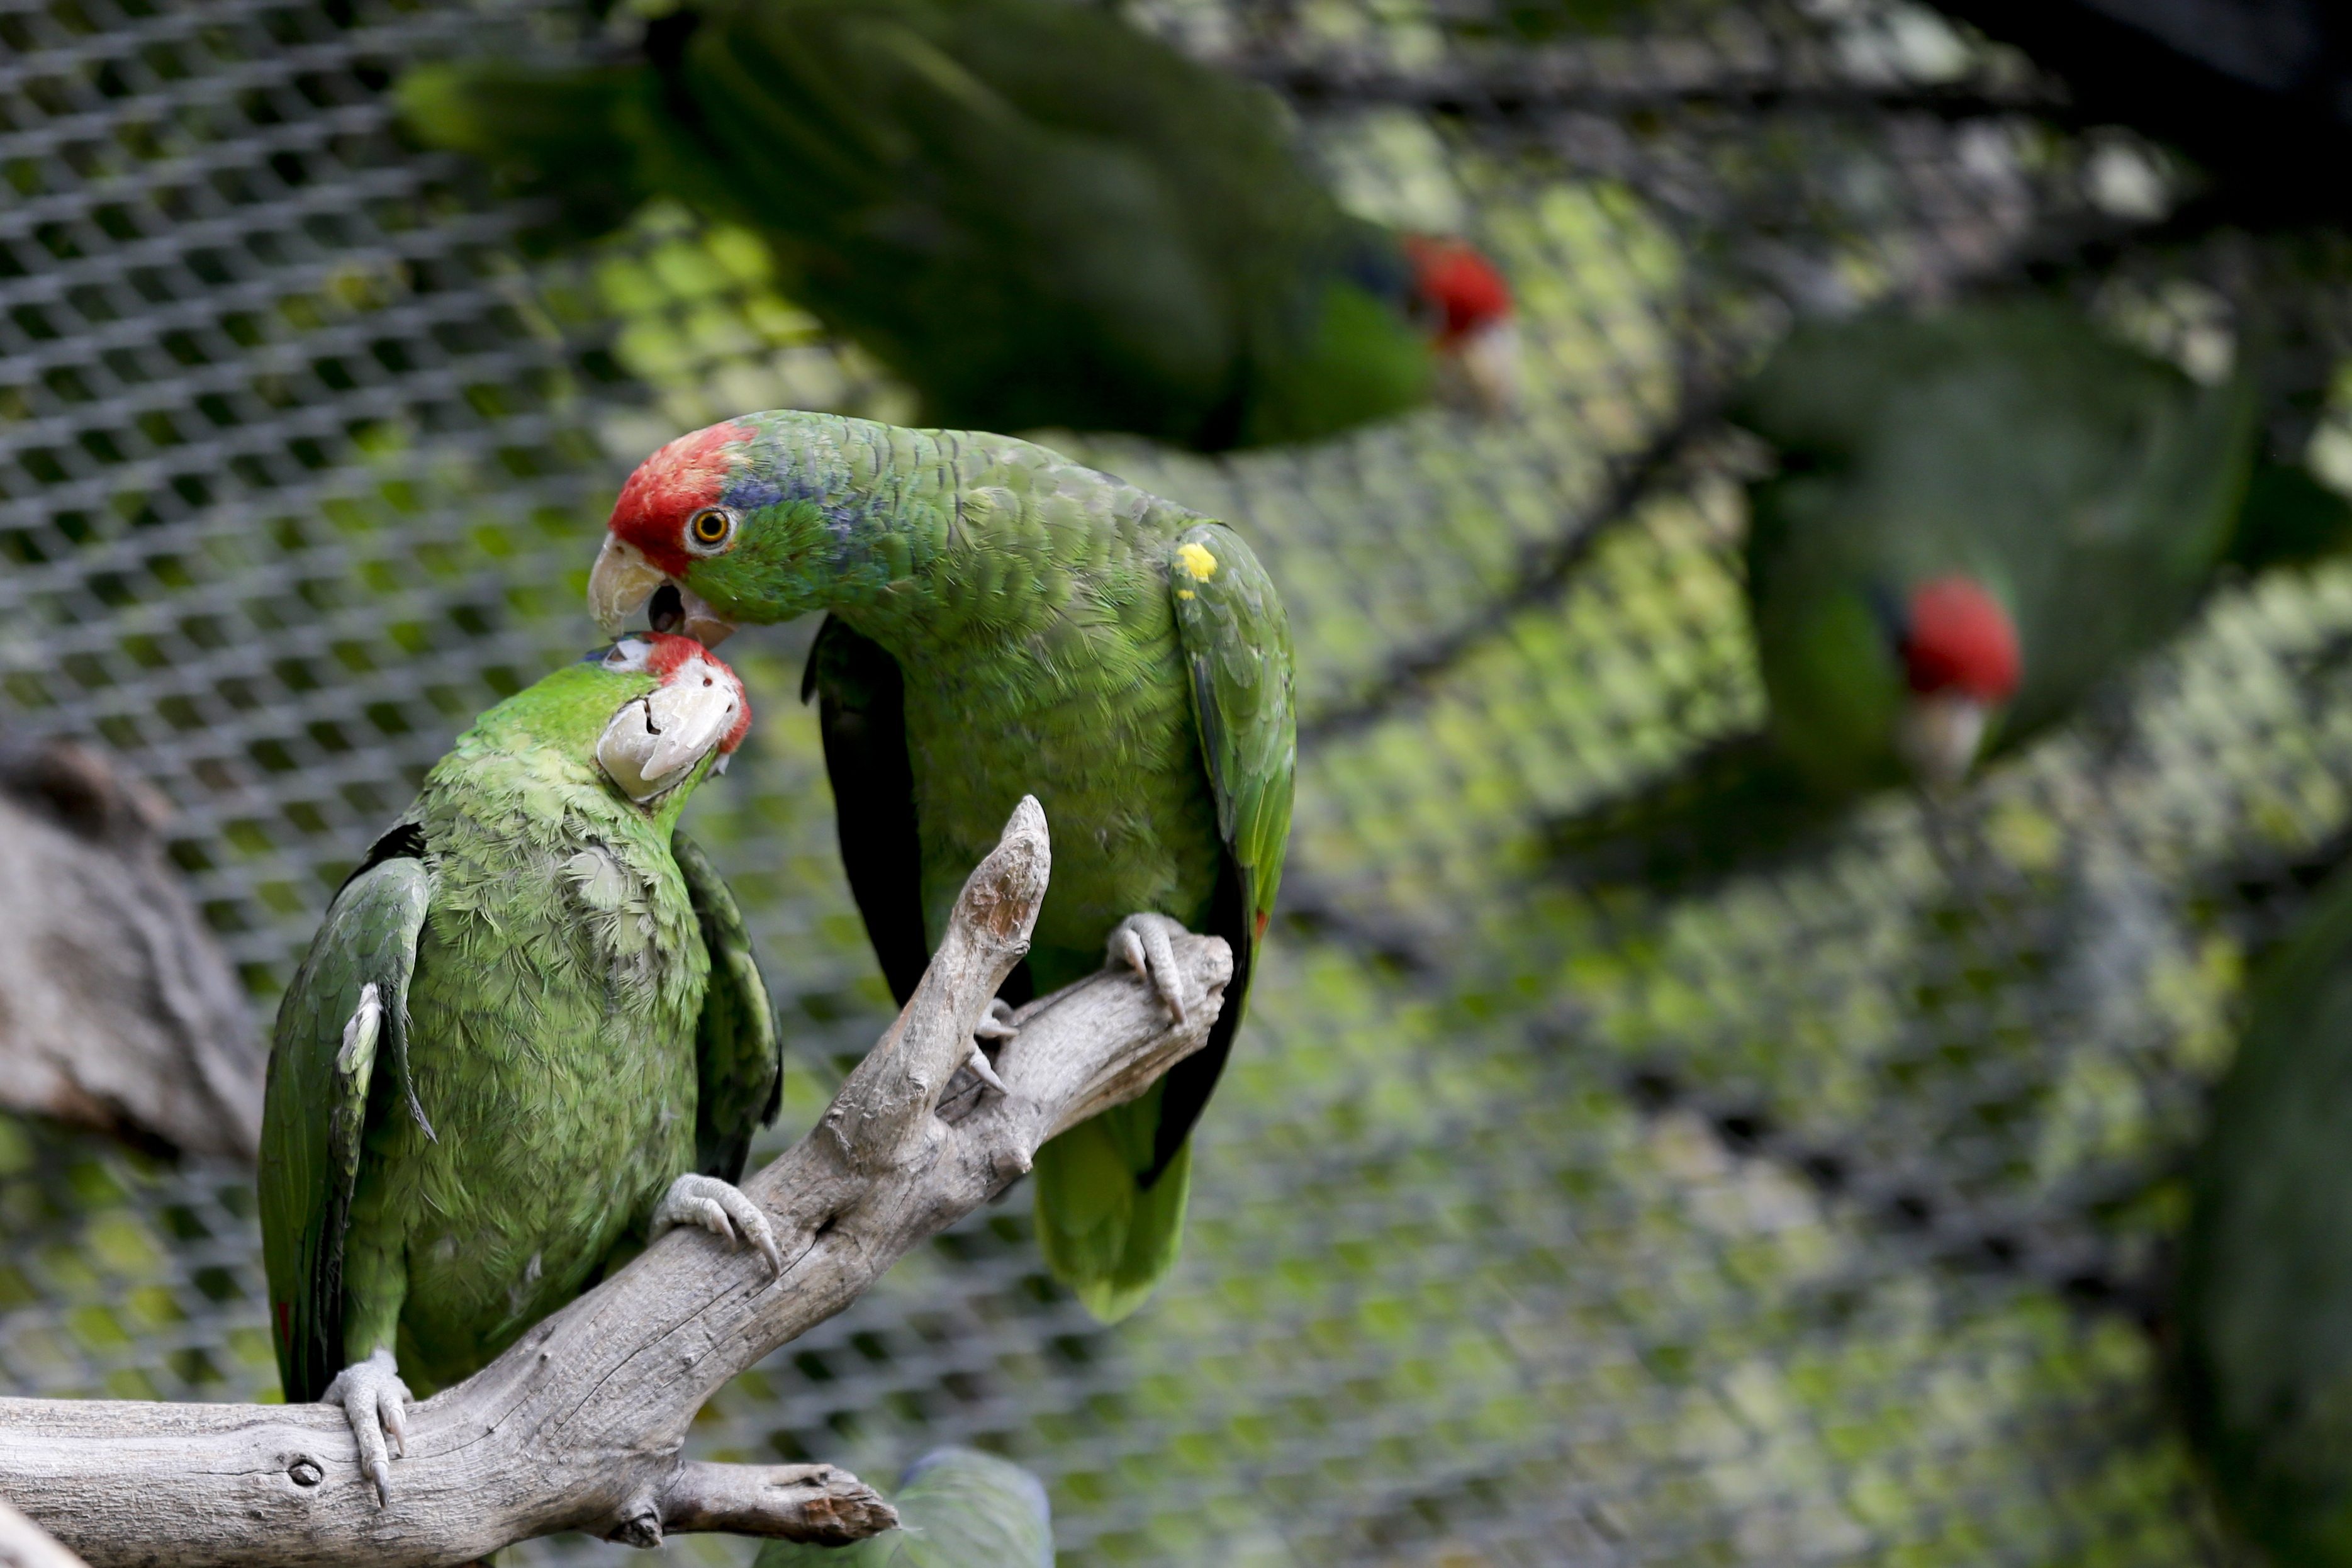 In this Wednesday, March 30, 2016 photo, parrots interact at SoCal Parrot, a parrot-rescue center, in Jamul, Calif. U.S. researchers are launching studies on Mexico?s red crowned parrot  - a species that has been adapting so well to living in cities in California and Texas after escaping from the pet trade that the population may now rival that in its native country.